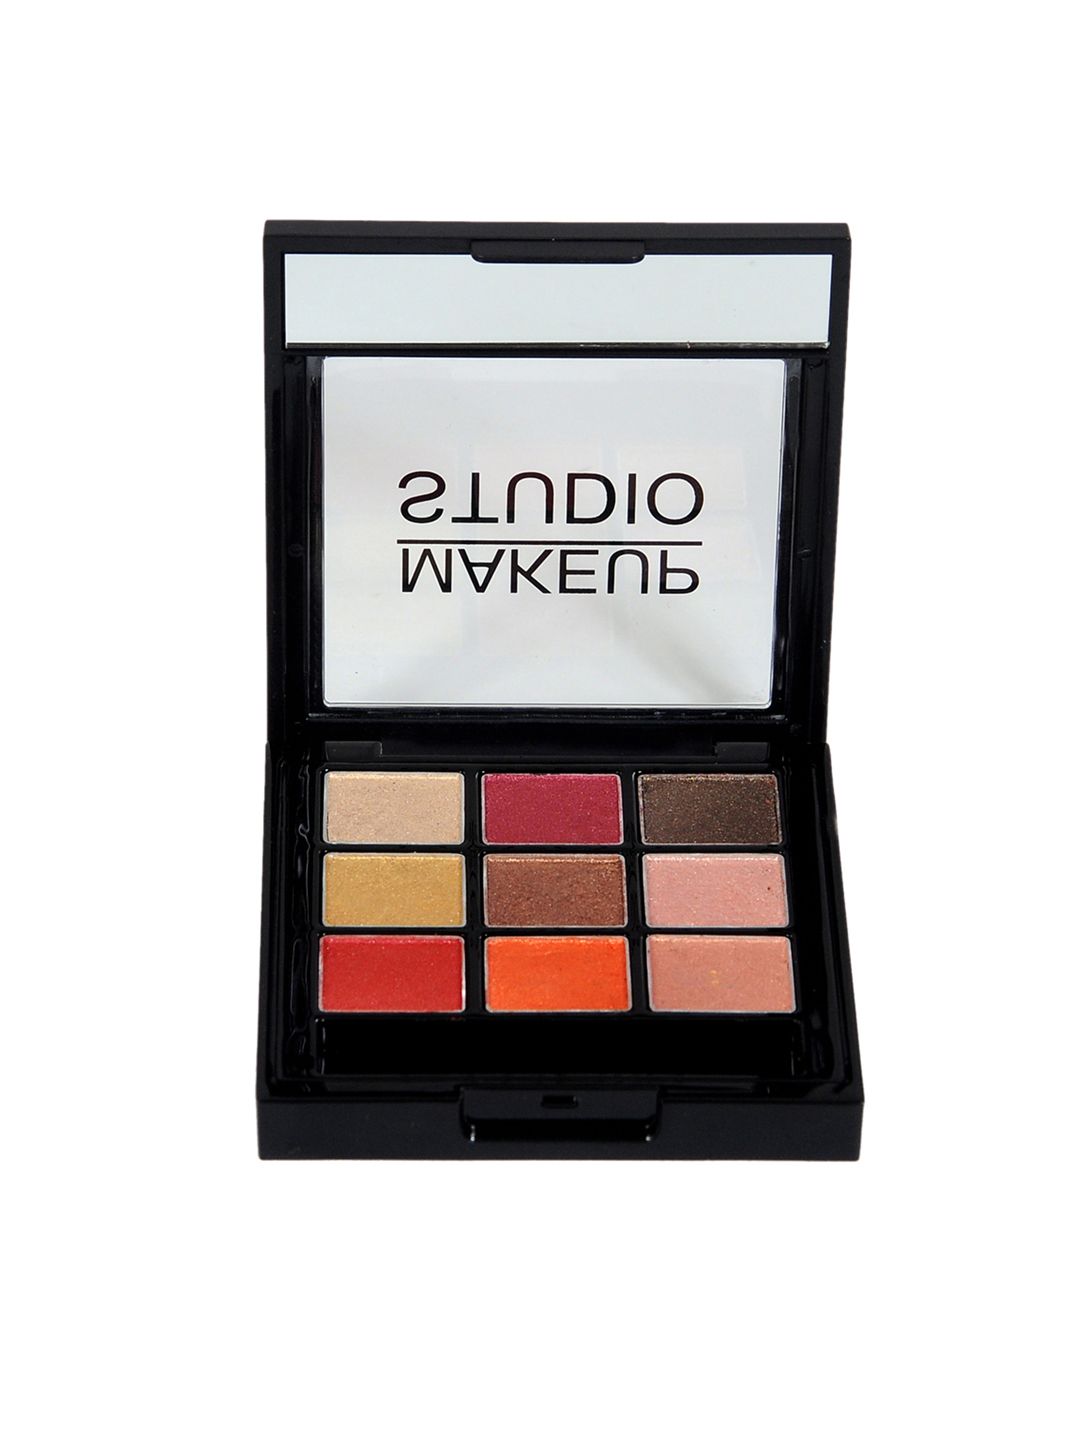 INCOLOR Women Make Up Studio 9 In 1 Eyeshadow Palette 04 - 18 g Price in India